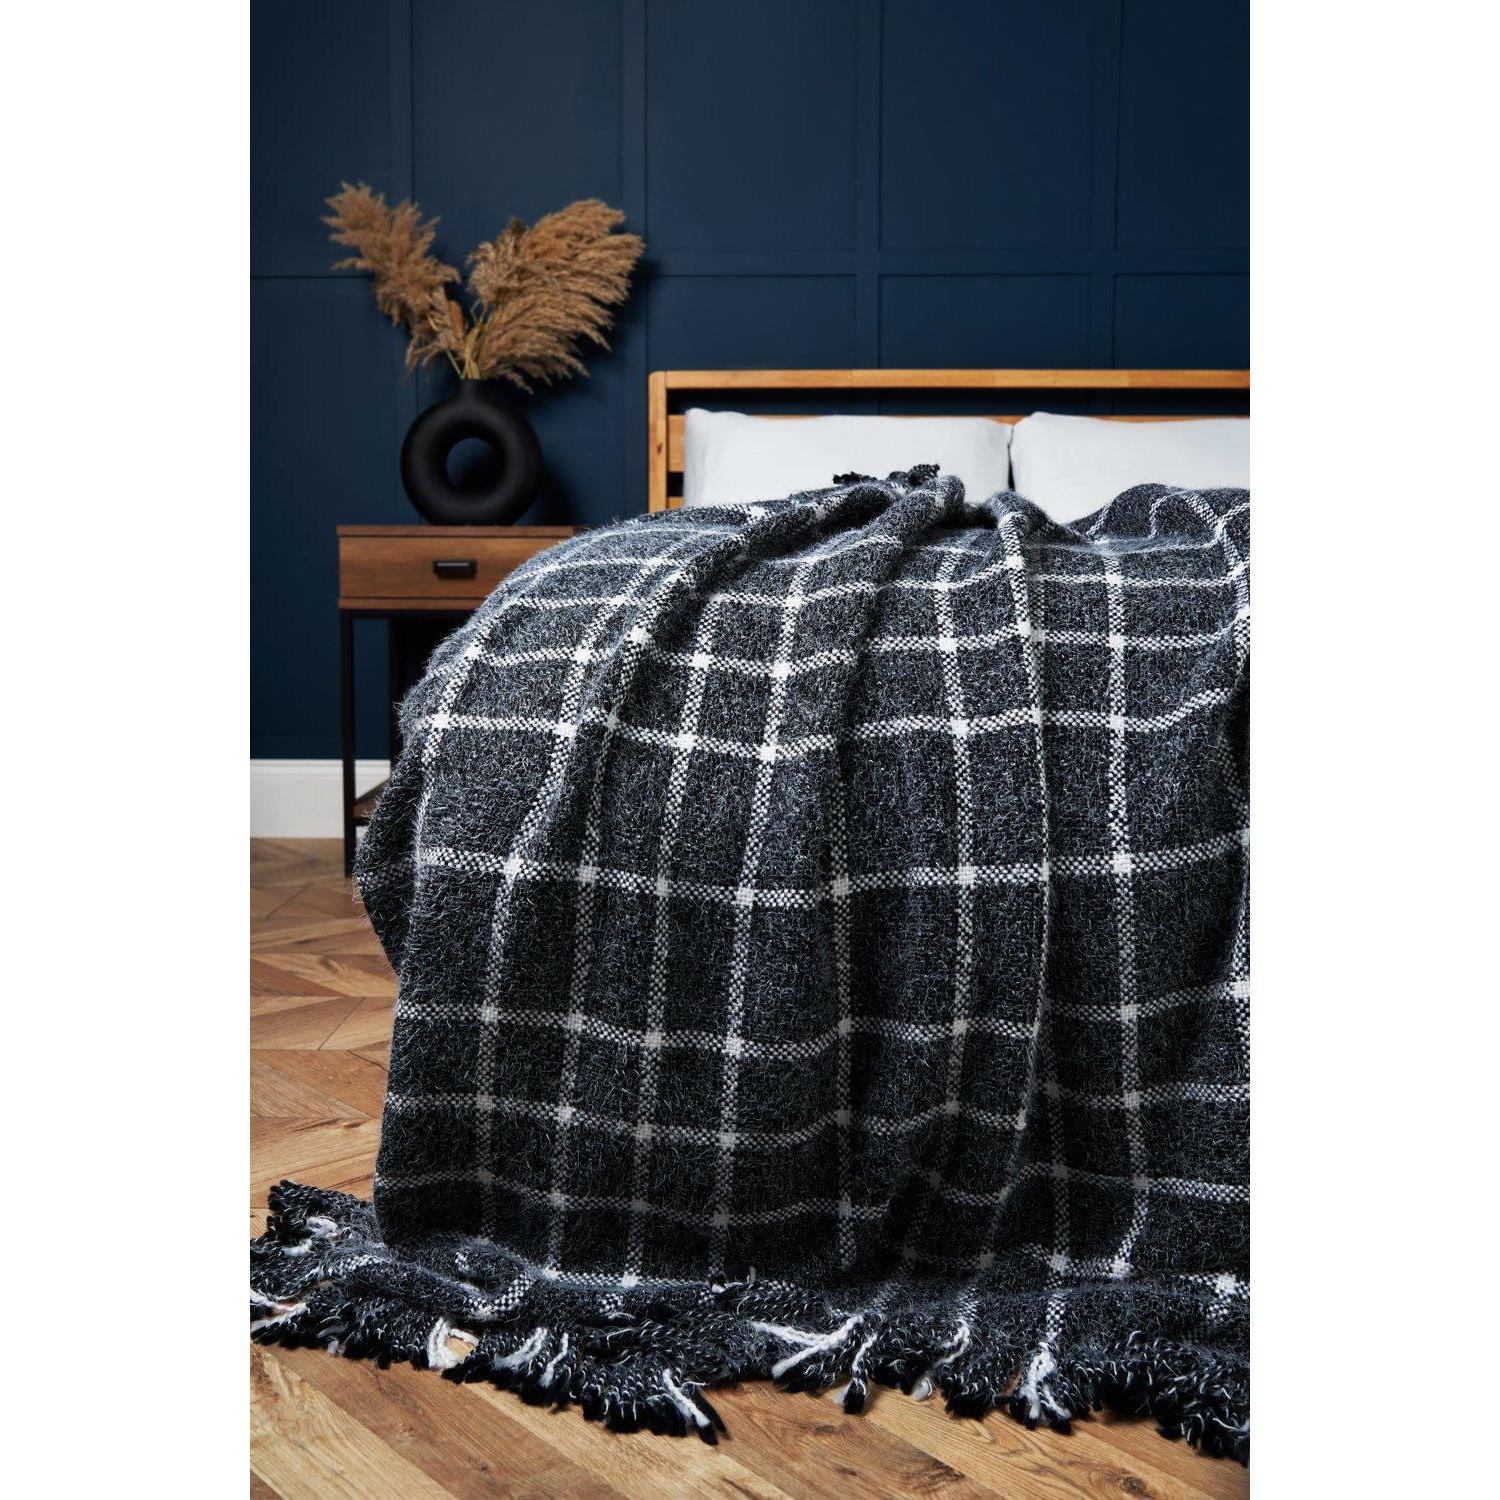 Chequers Throw - image 1